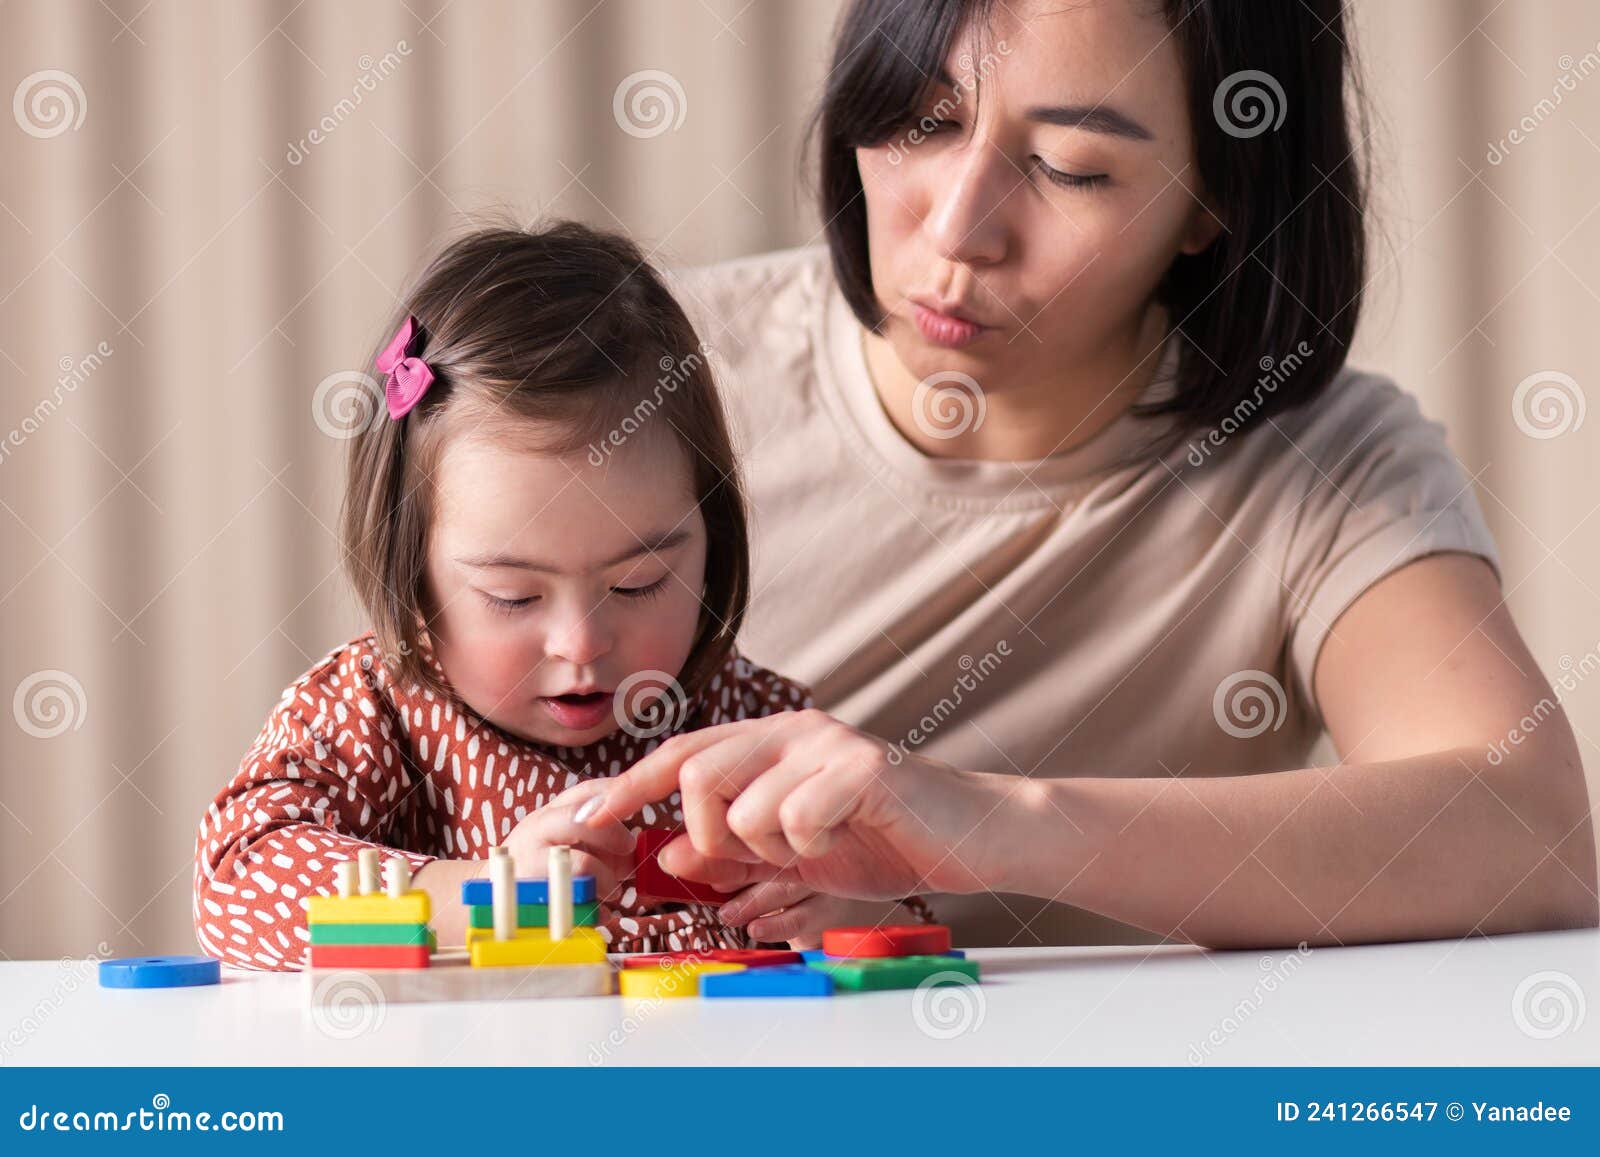 sensorimotor development of children with down syndrome,cute girl with her mother